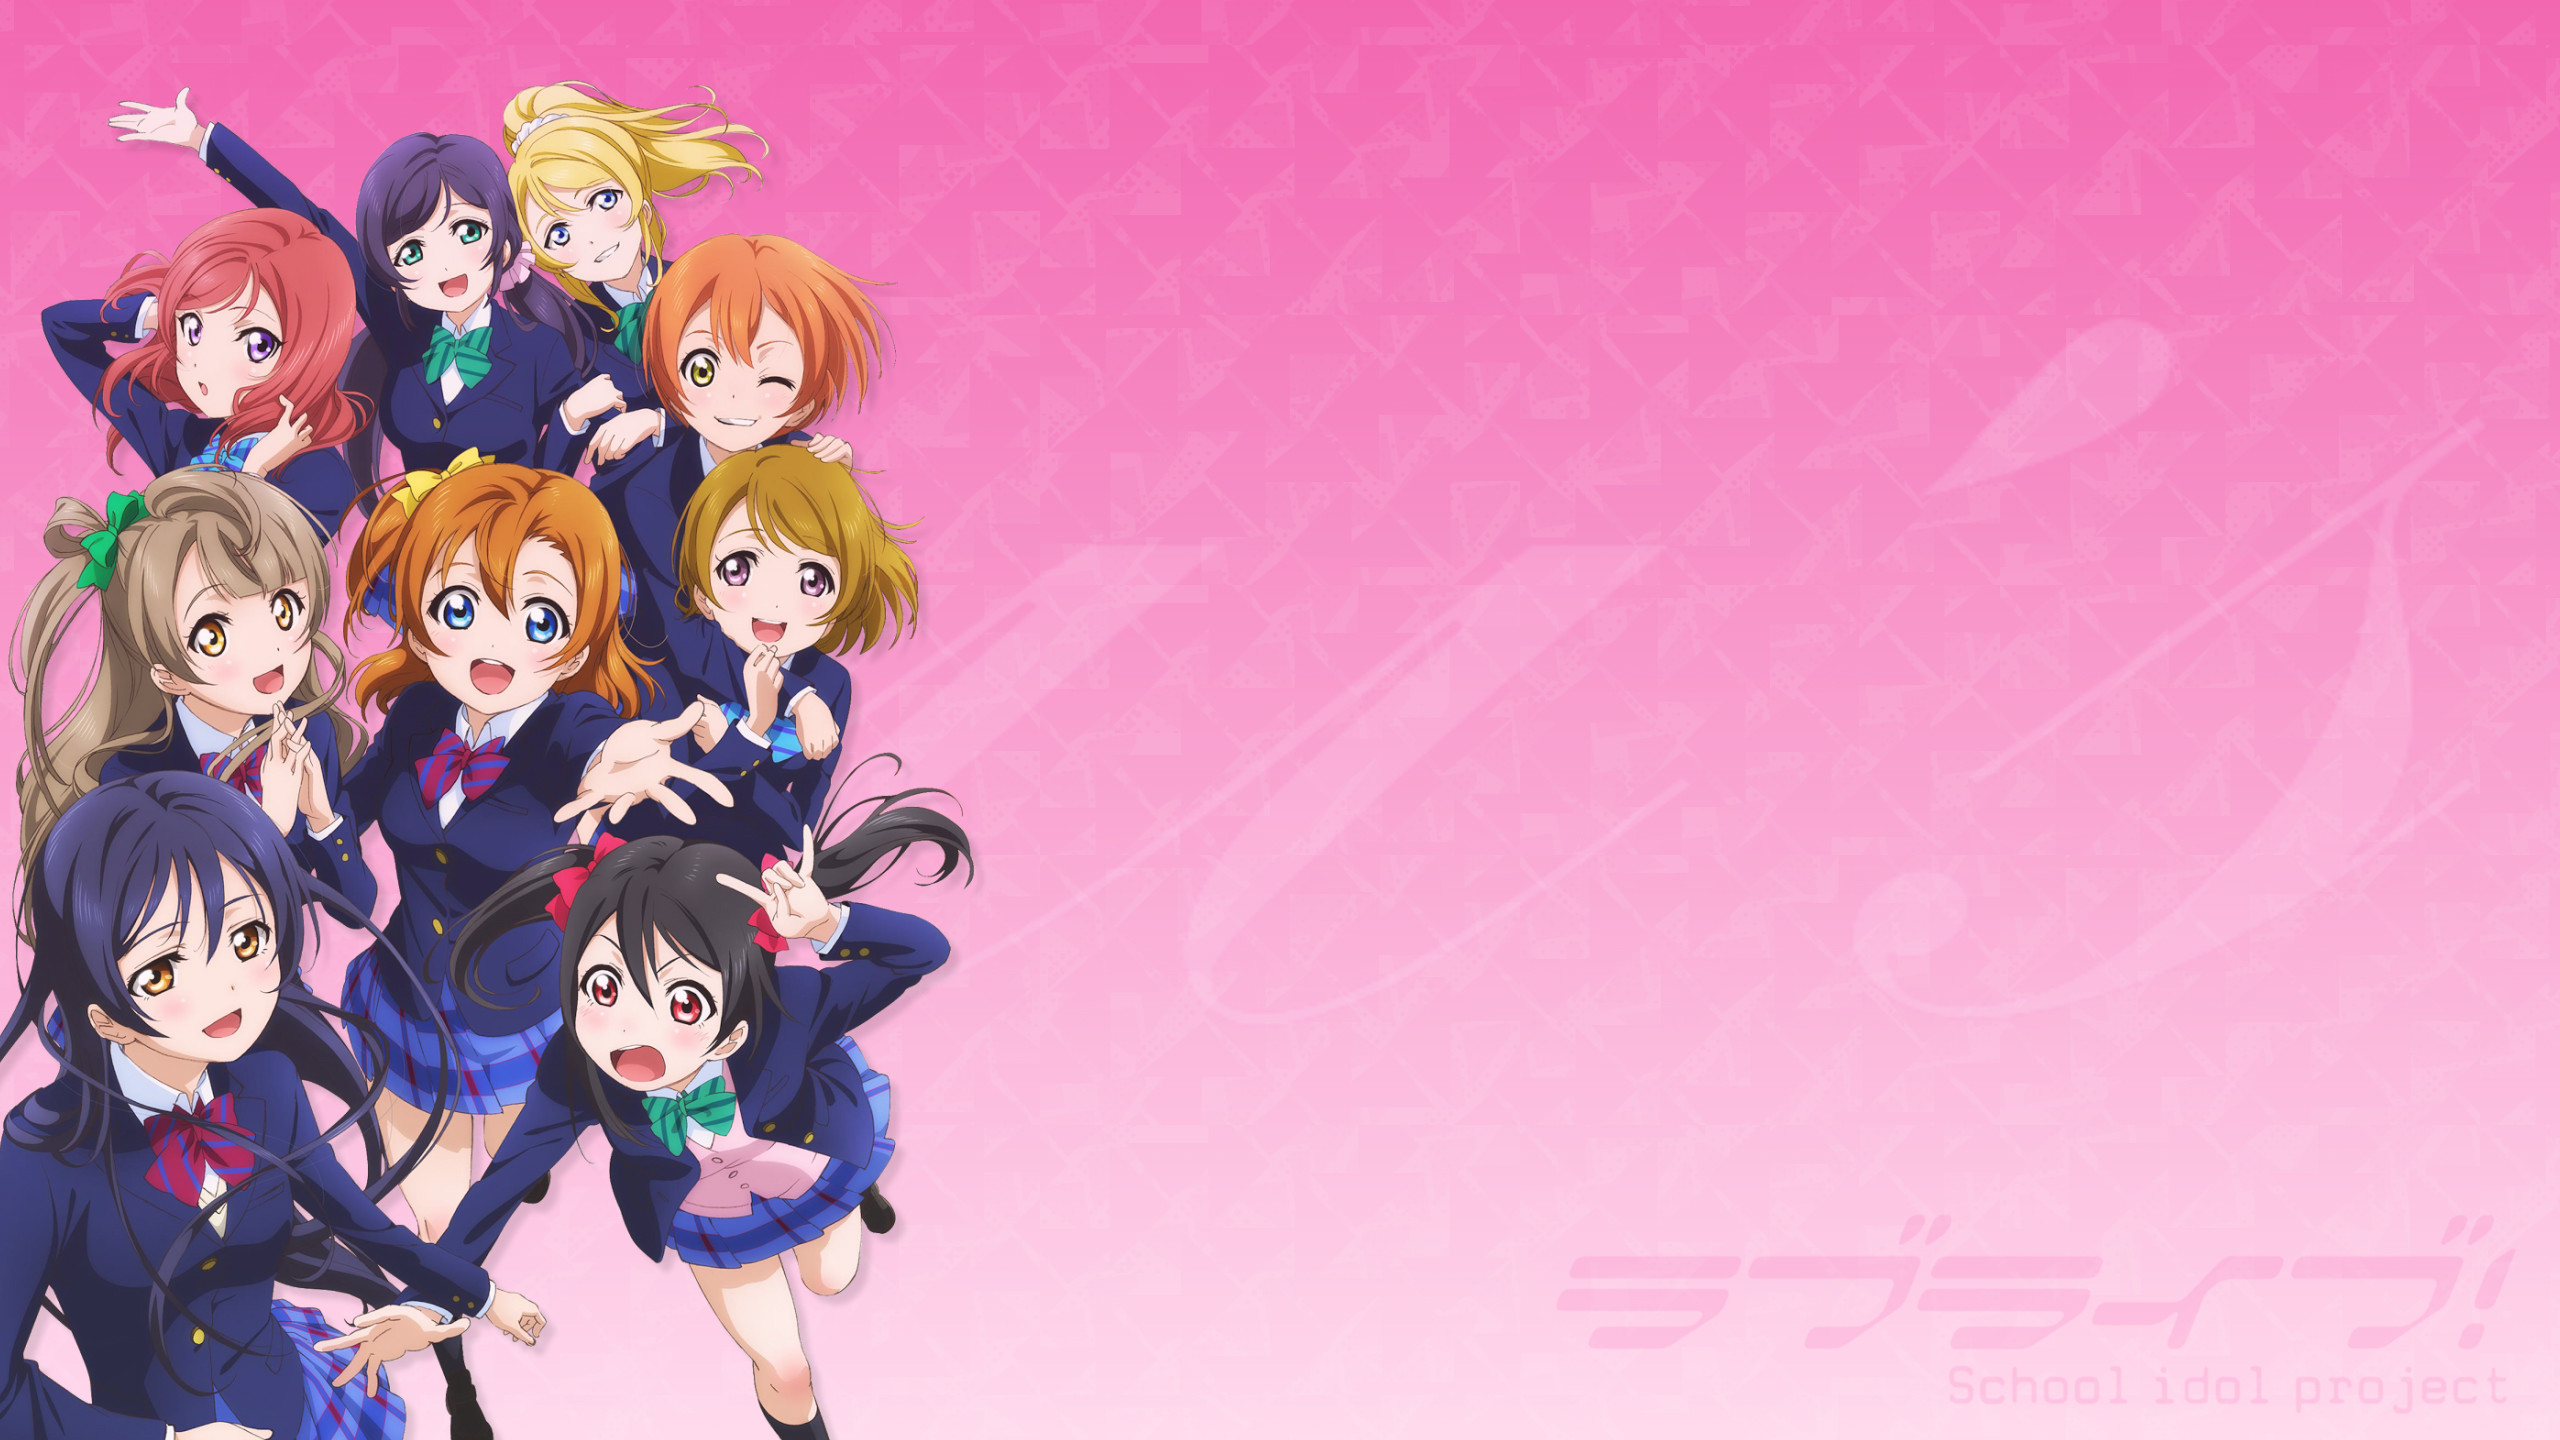 2560x1440 Tree of Love Live Wallpaper Android Apps on Google Play 1920Ã1080 Love Live  Wallpapers